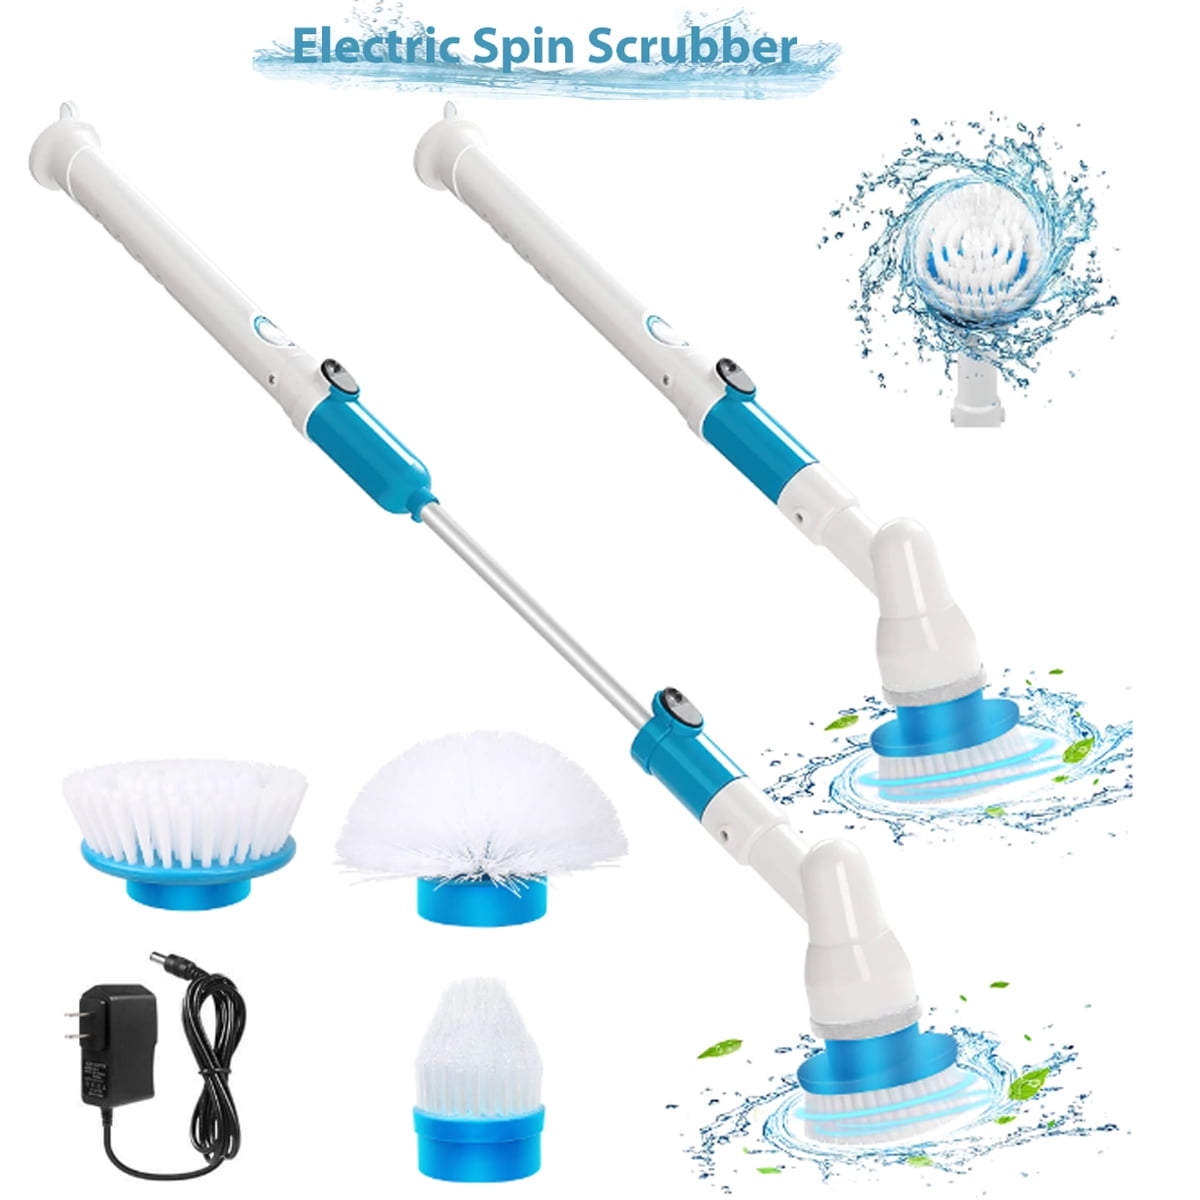 Electric Cleaning Turbo Scrub Brush Adjustable Spin Scrubber 800W Bathroom  Kitchen Cleaning Rotating Handle Floor Cleaner EG-01A - AliExpress